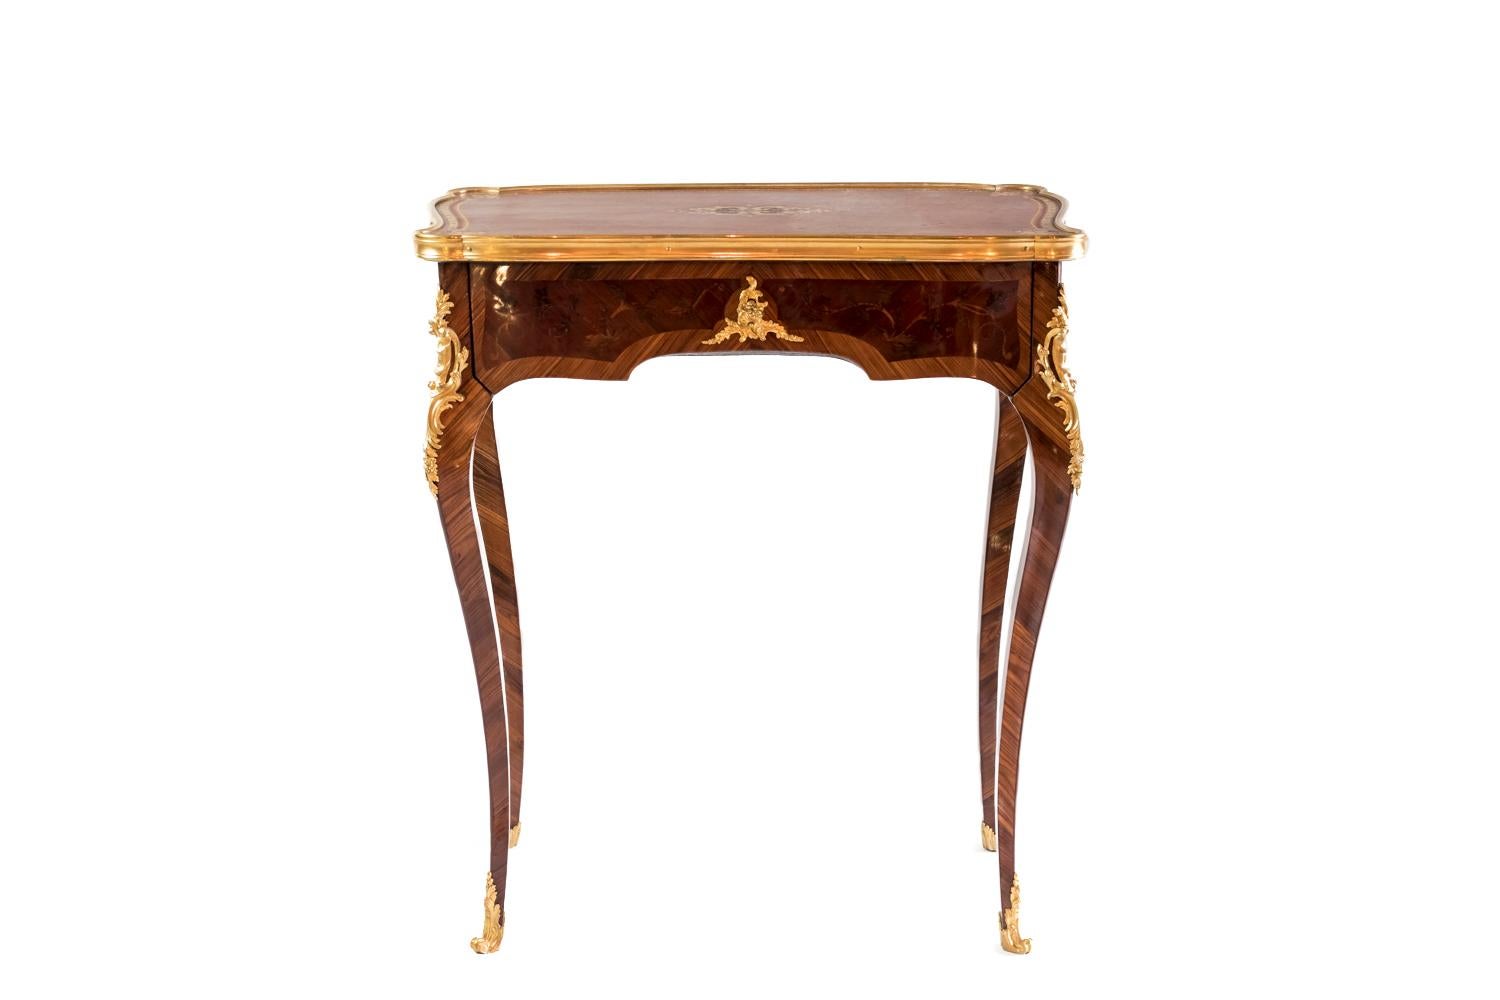 Louis XV style small table in marquetry and gilt bronze standing on four cabriole legs and opening by a drawer. Scalloped apron adorned with a frisage decor and marquetry cartouches with foliage scrolls decoration. Scalloped tray covered with cognac